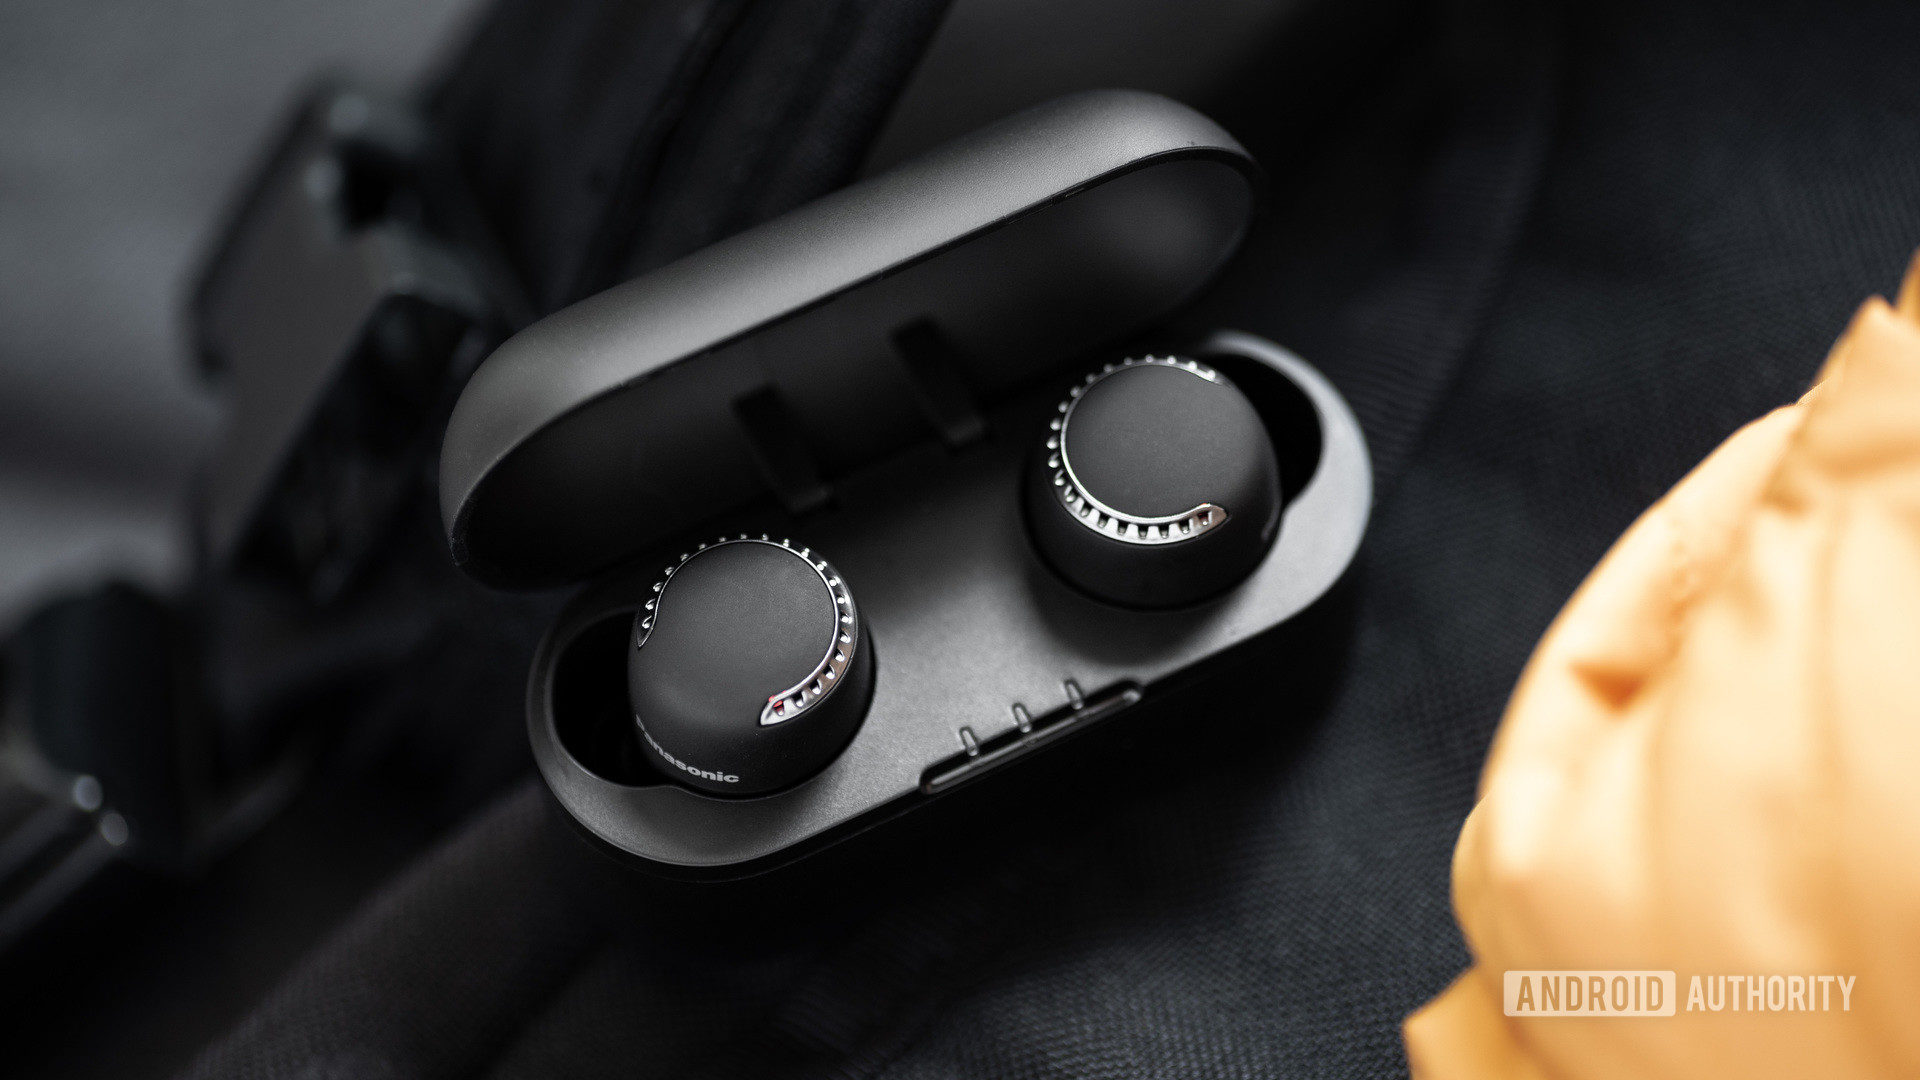 The Panasonic RZ-S500W noise cancelling earbuds both in the case, showing the LEDs on the buds.